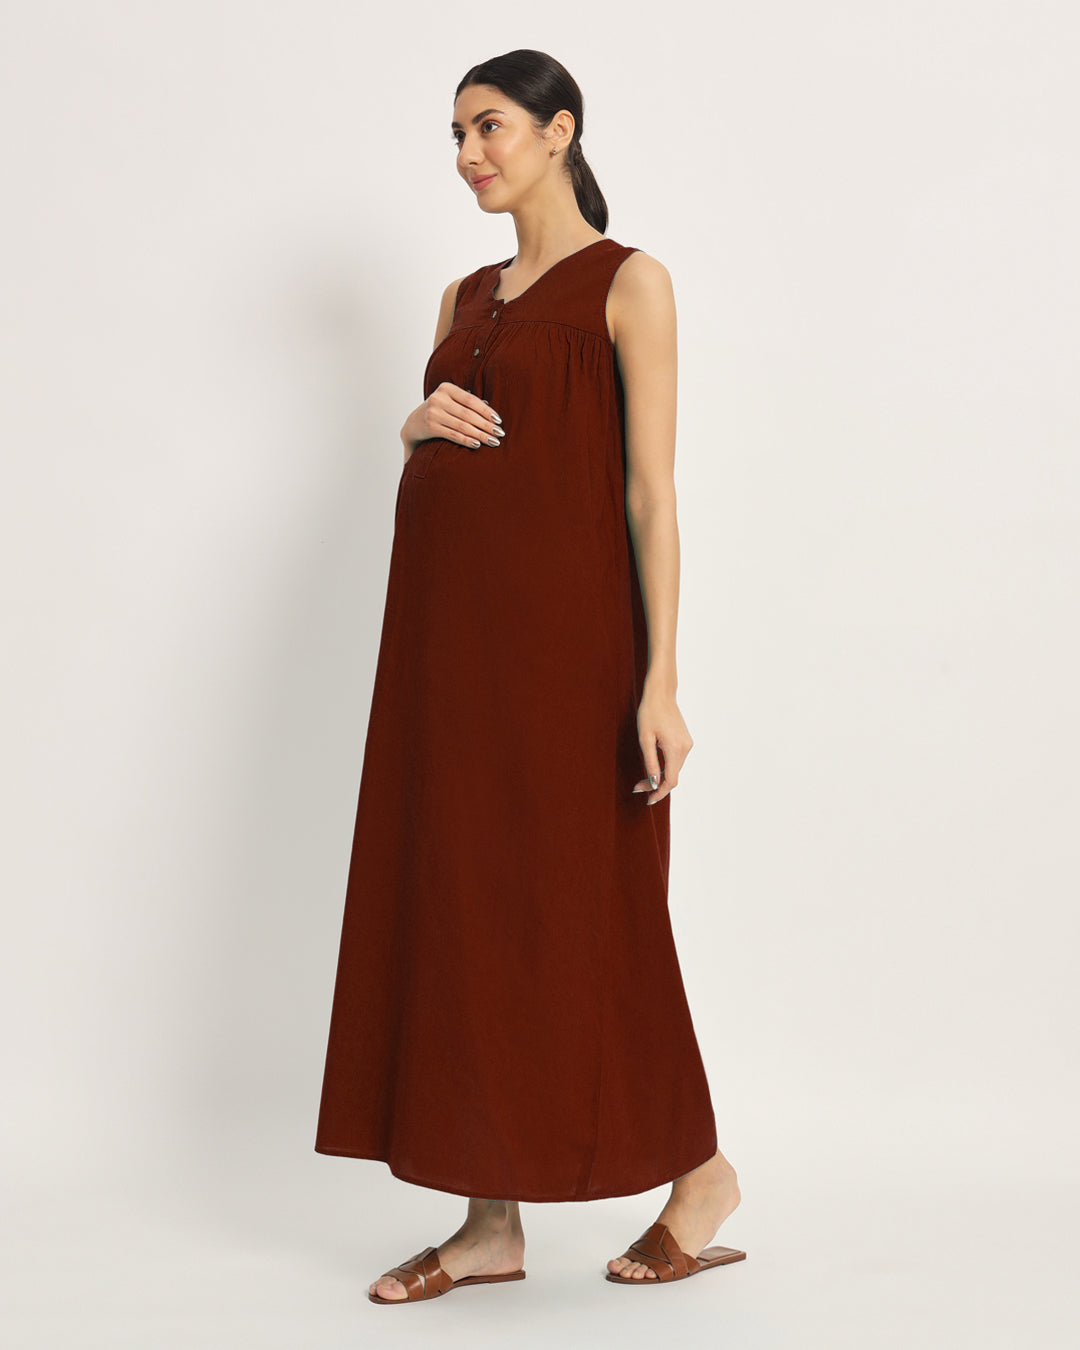 Combo: Russet Red & Wisteria Purple Mommylicious Maternity & Nursing Dress